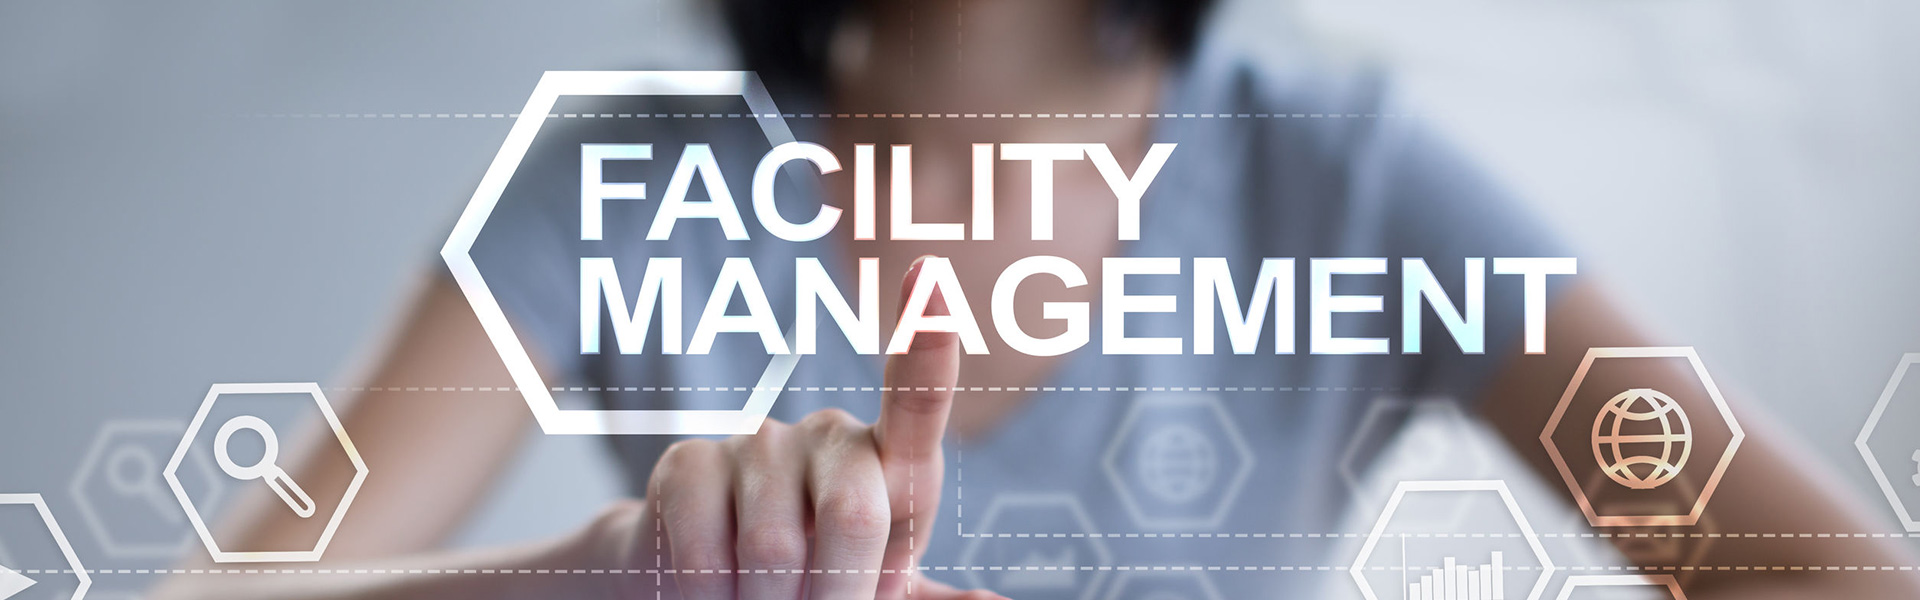 Ensuring Smooth Business Operations: The Necessity of Facility Management - WriteUpCafe.com